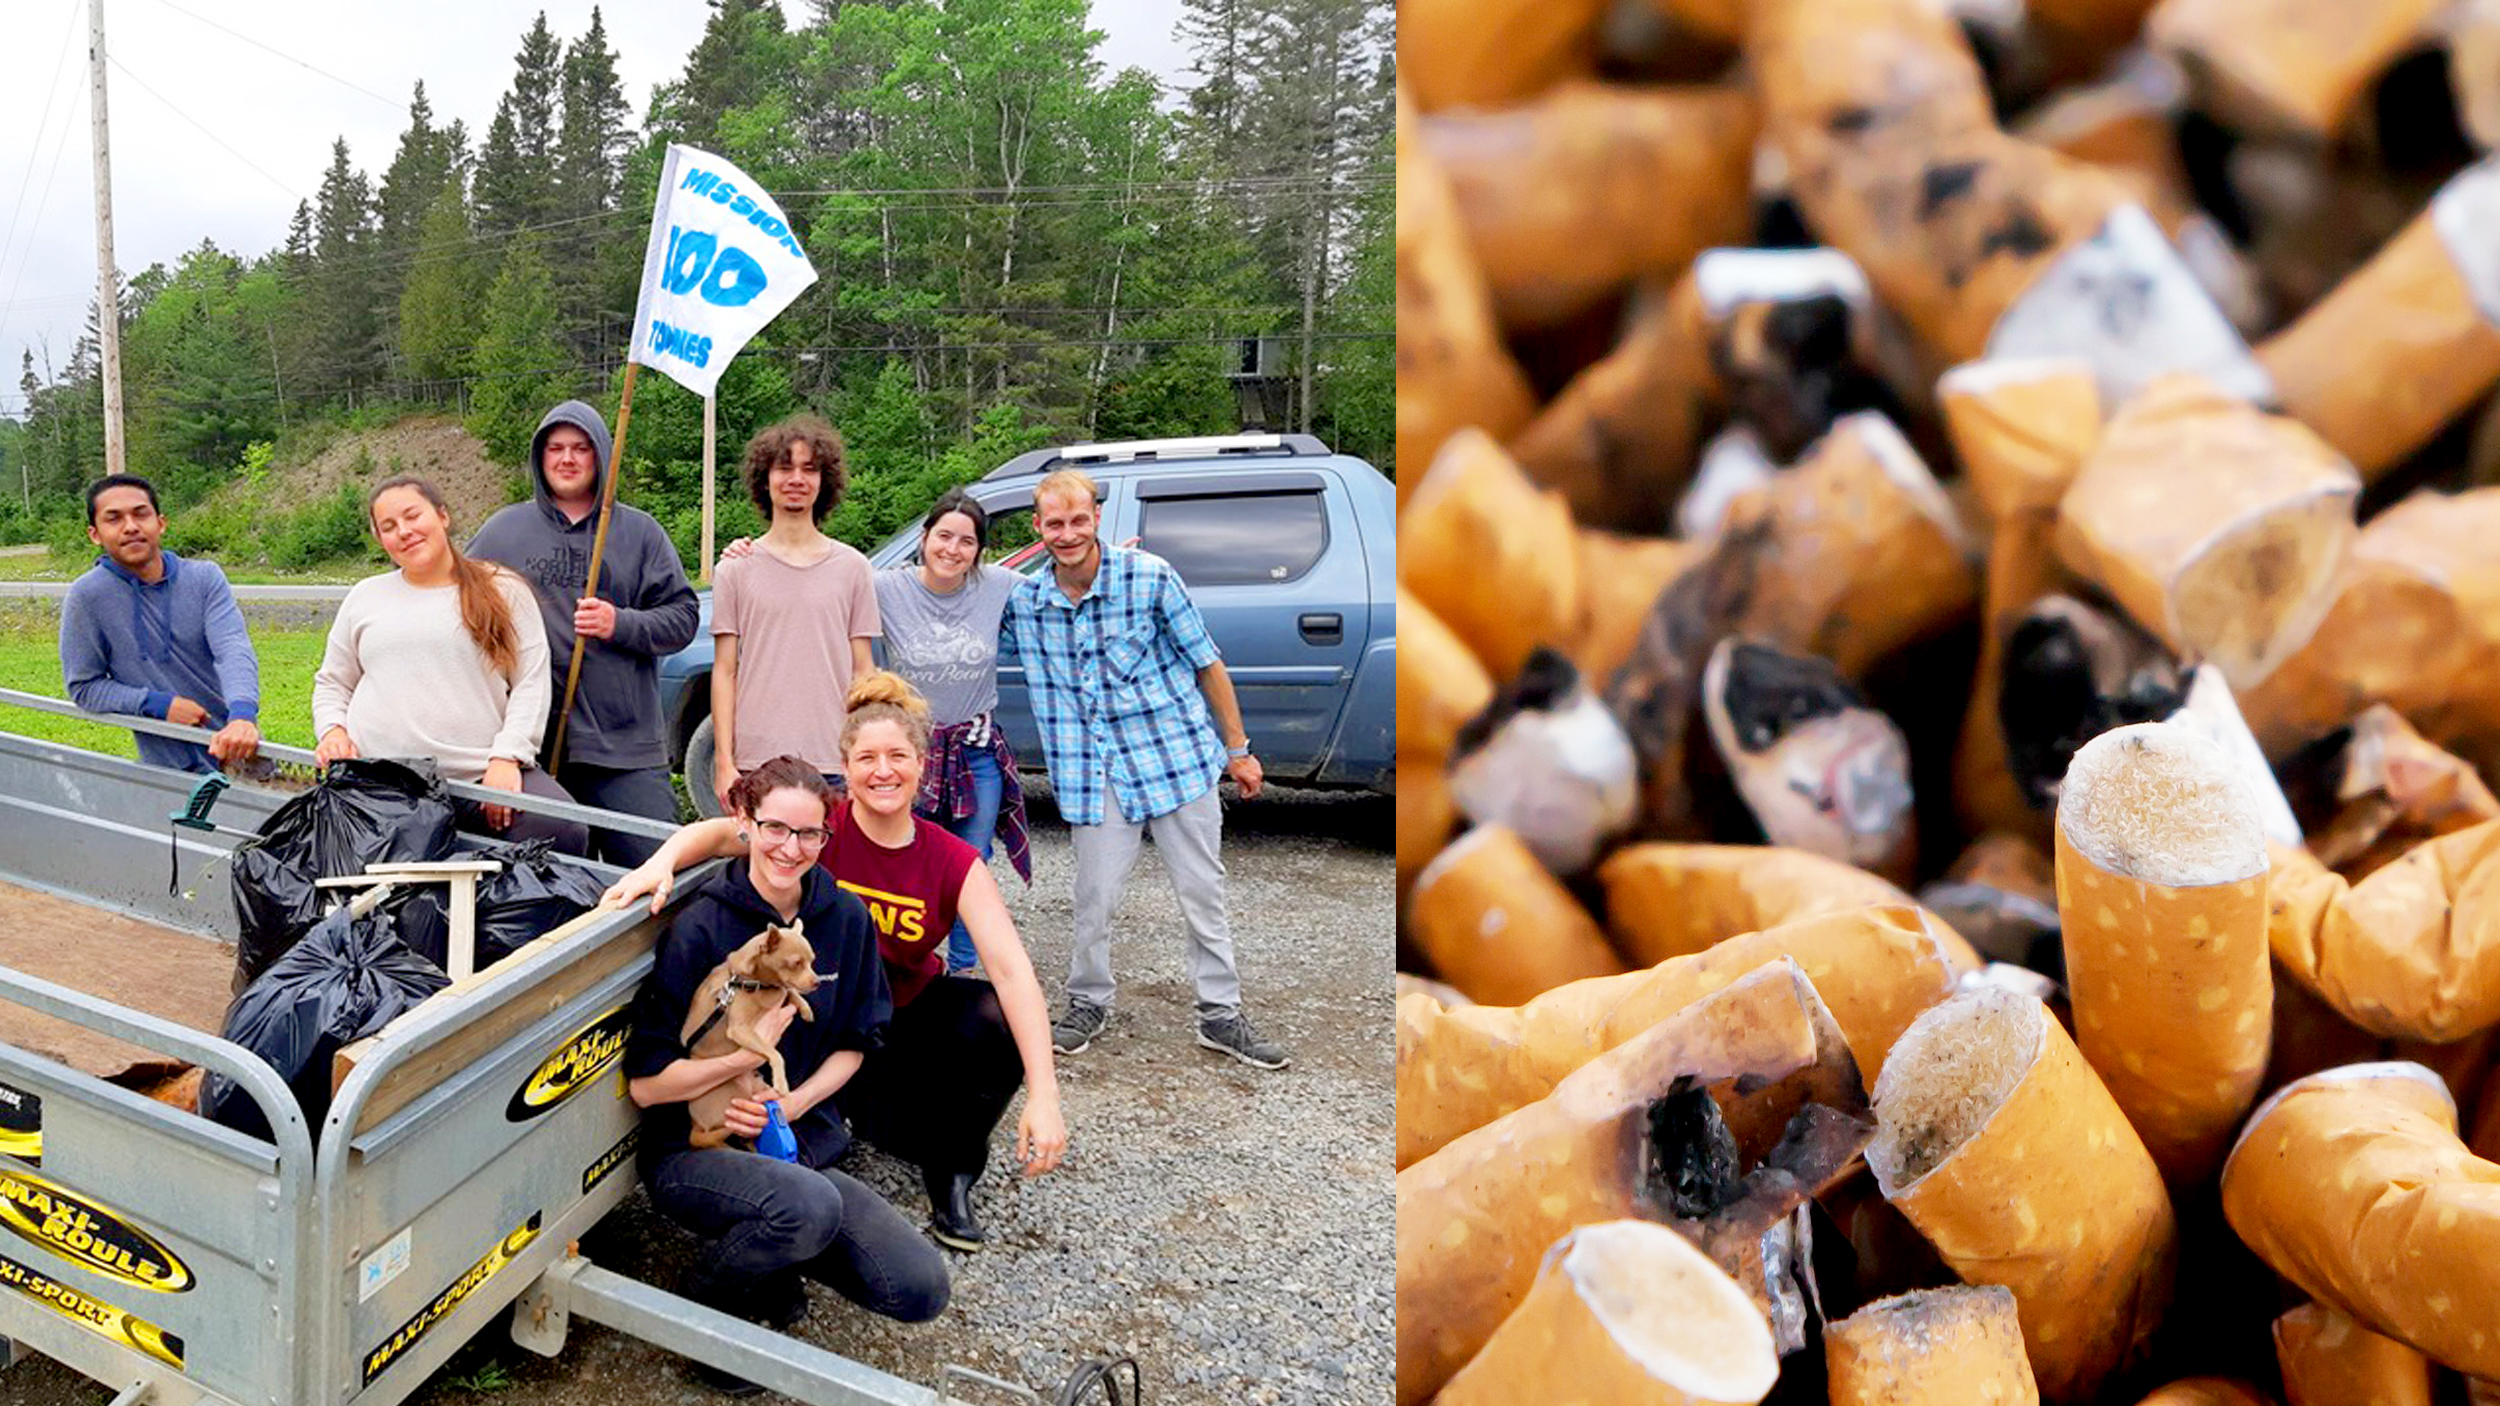 Young people from Matane discouraged by cigarette butts after picking up a ton of garbage